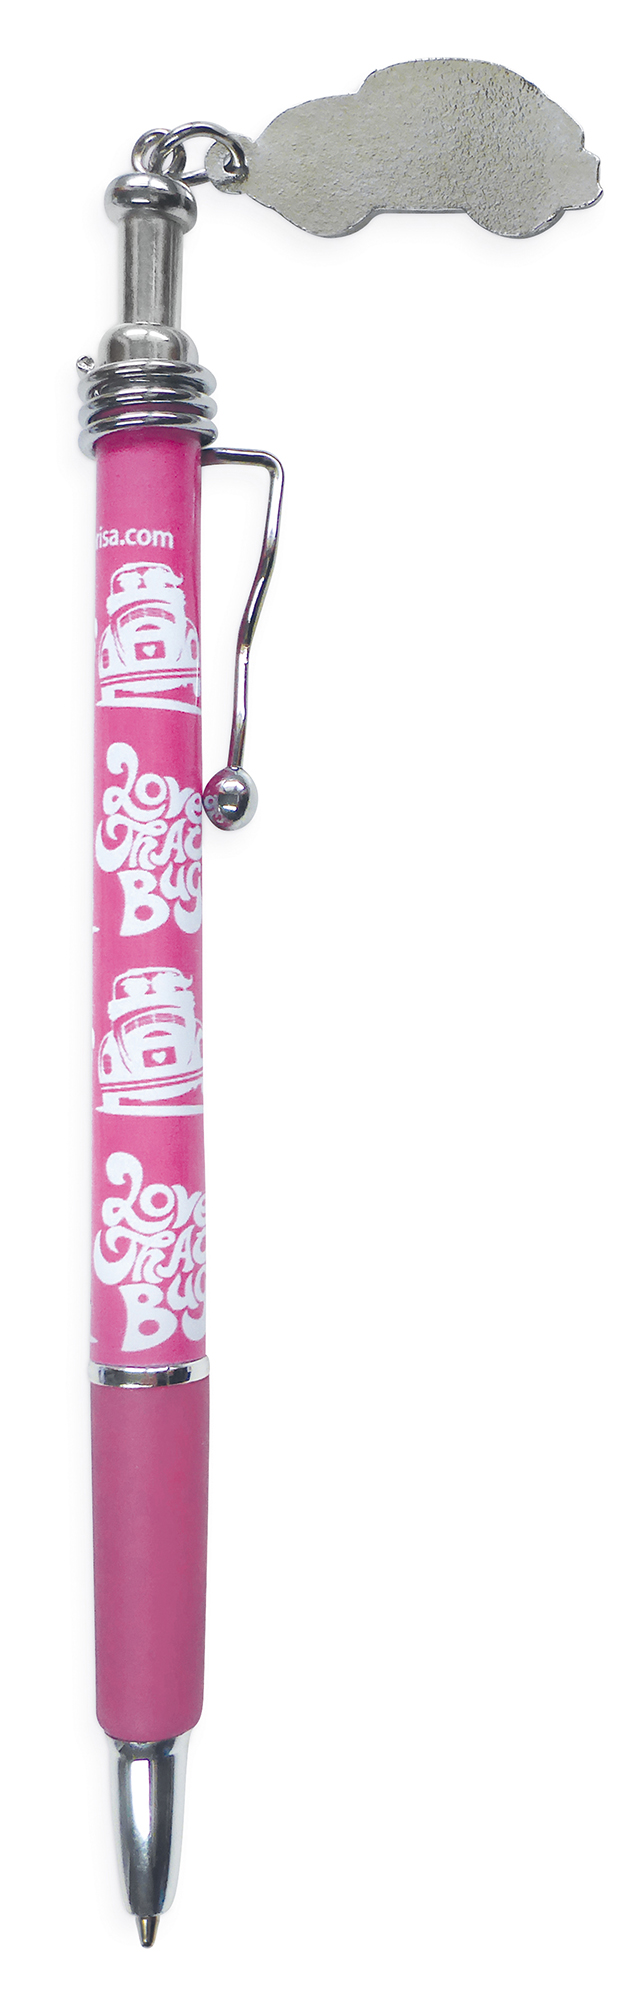 VW Beetle ball pen with pendant - pink